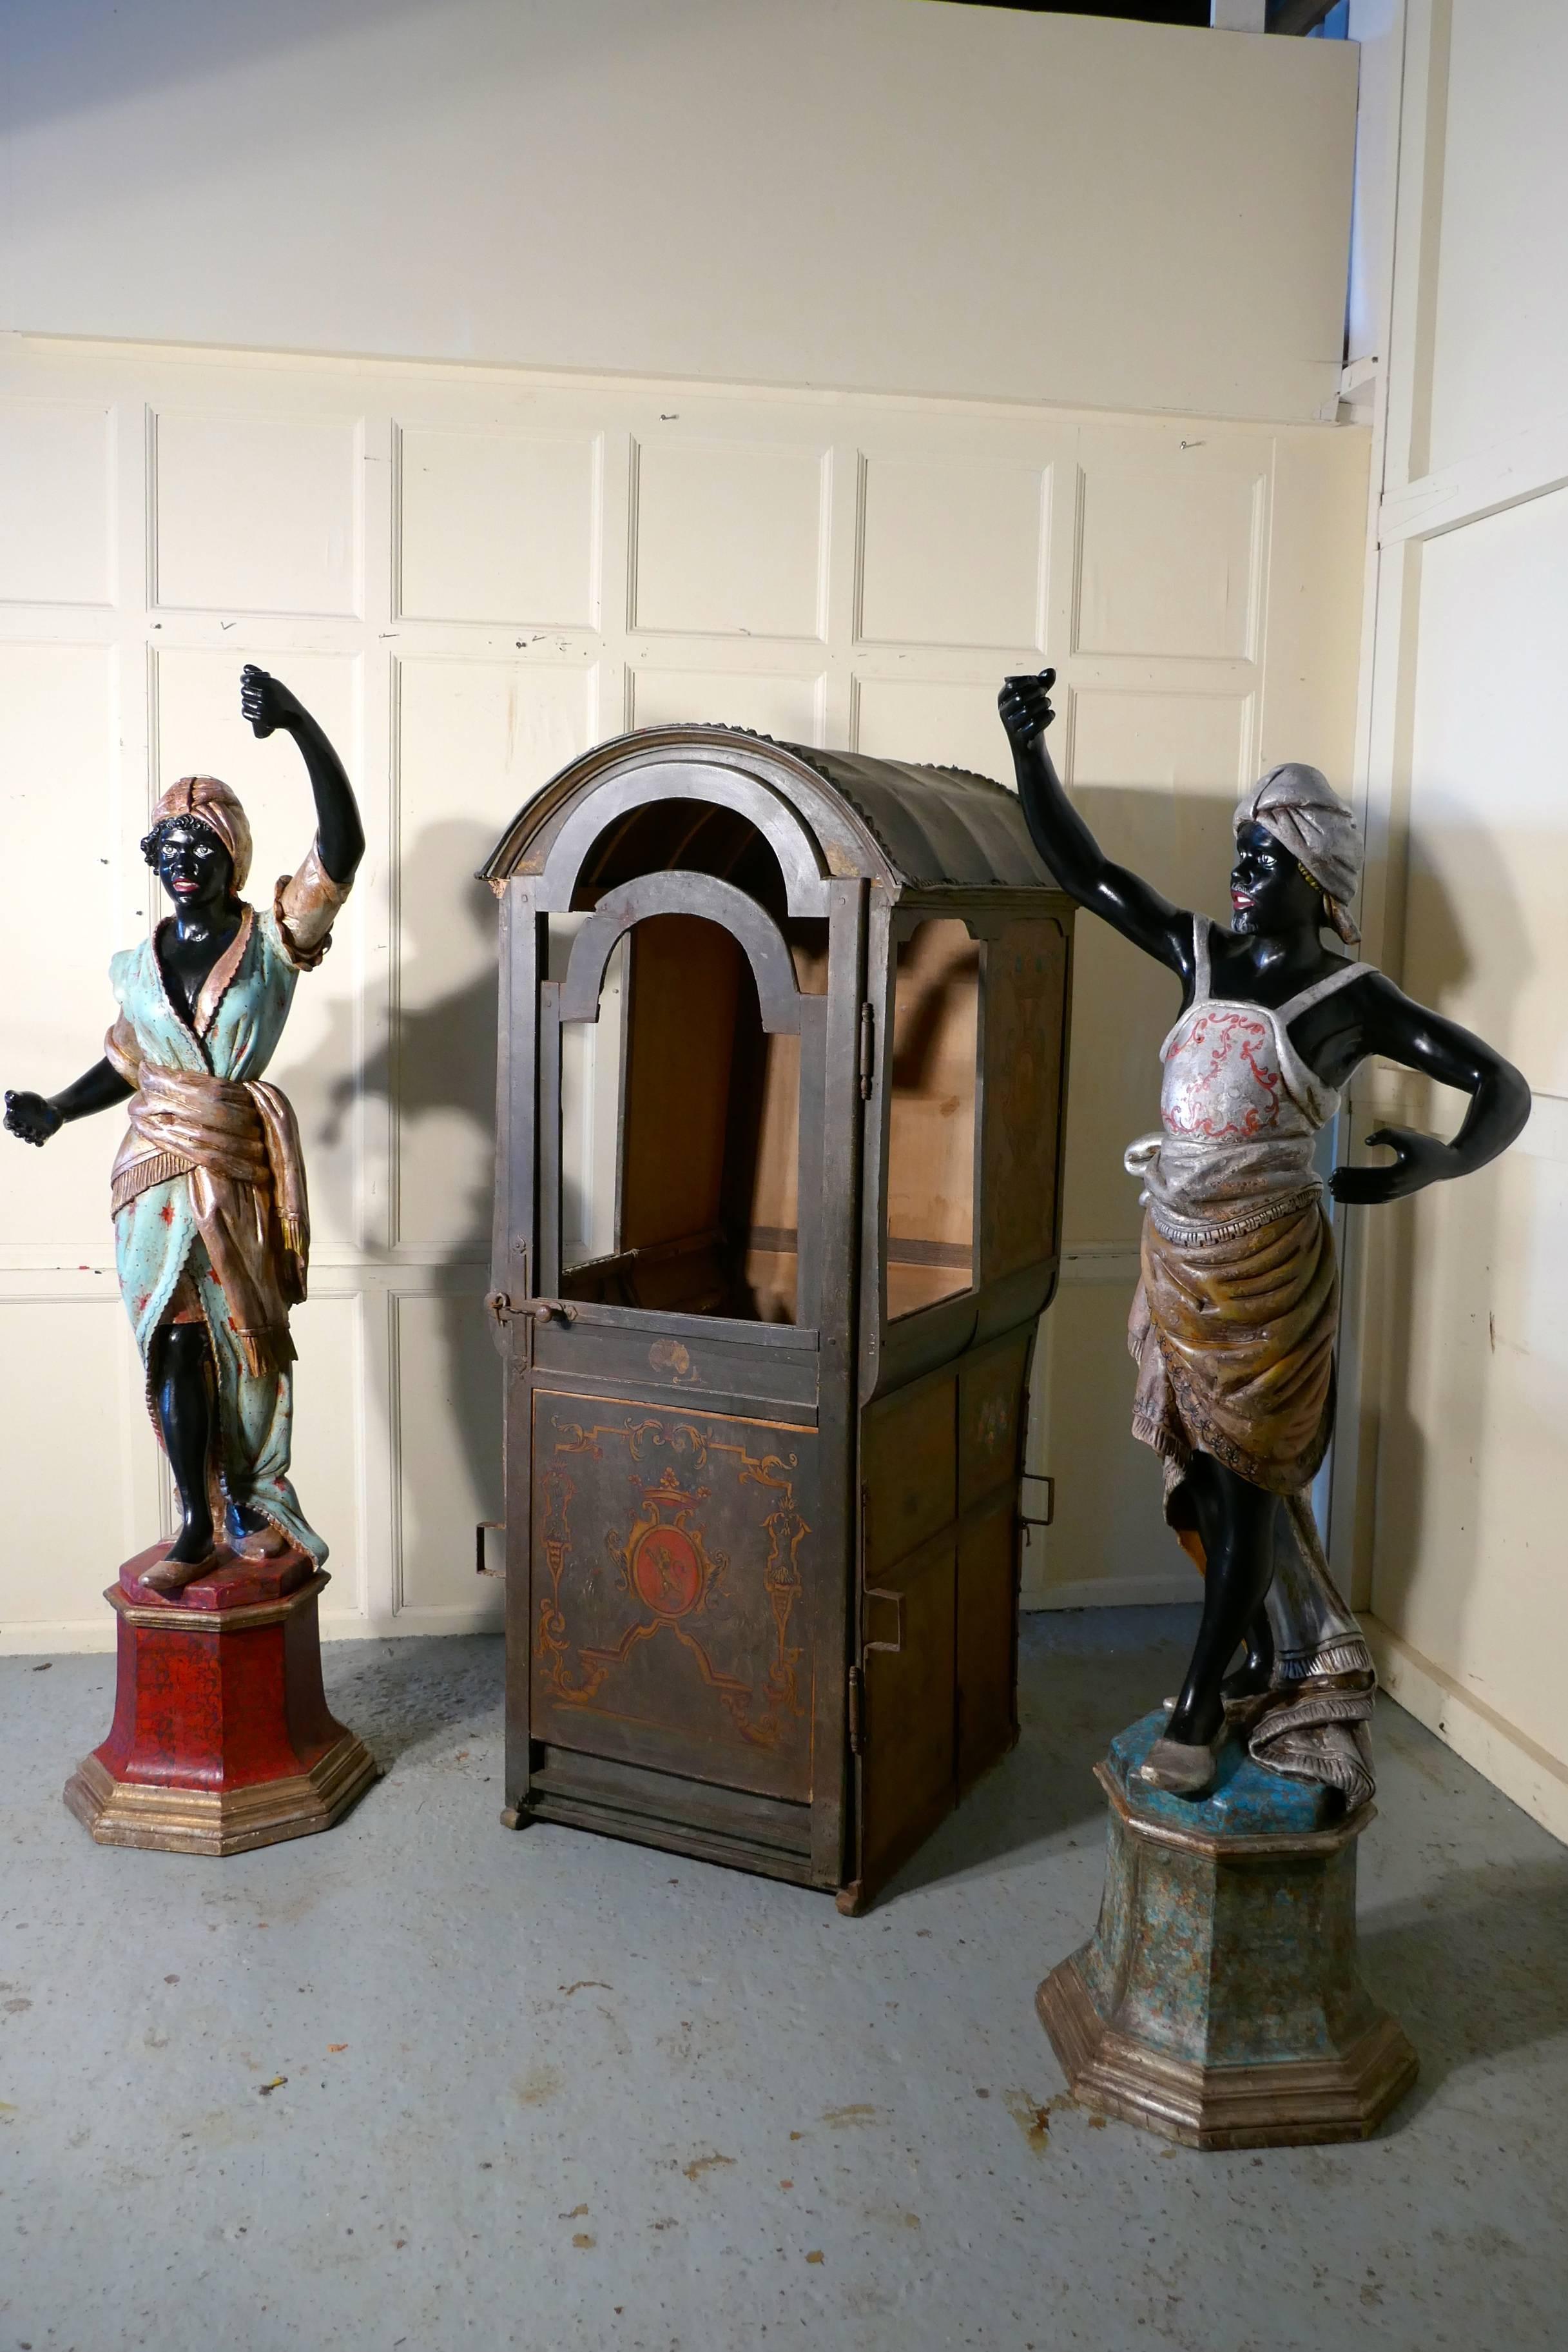 French Château de Chasse, Sedan Chair, Original Unrestored Circa 1740

Very Rare, this piece was discovered neglected in cellar of a Château in the West of France, it was used by the countess allowing her to follow the hunt and be included in all